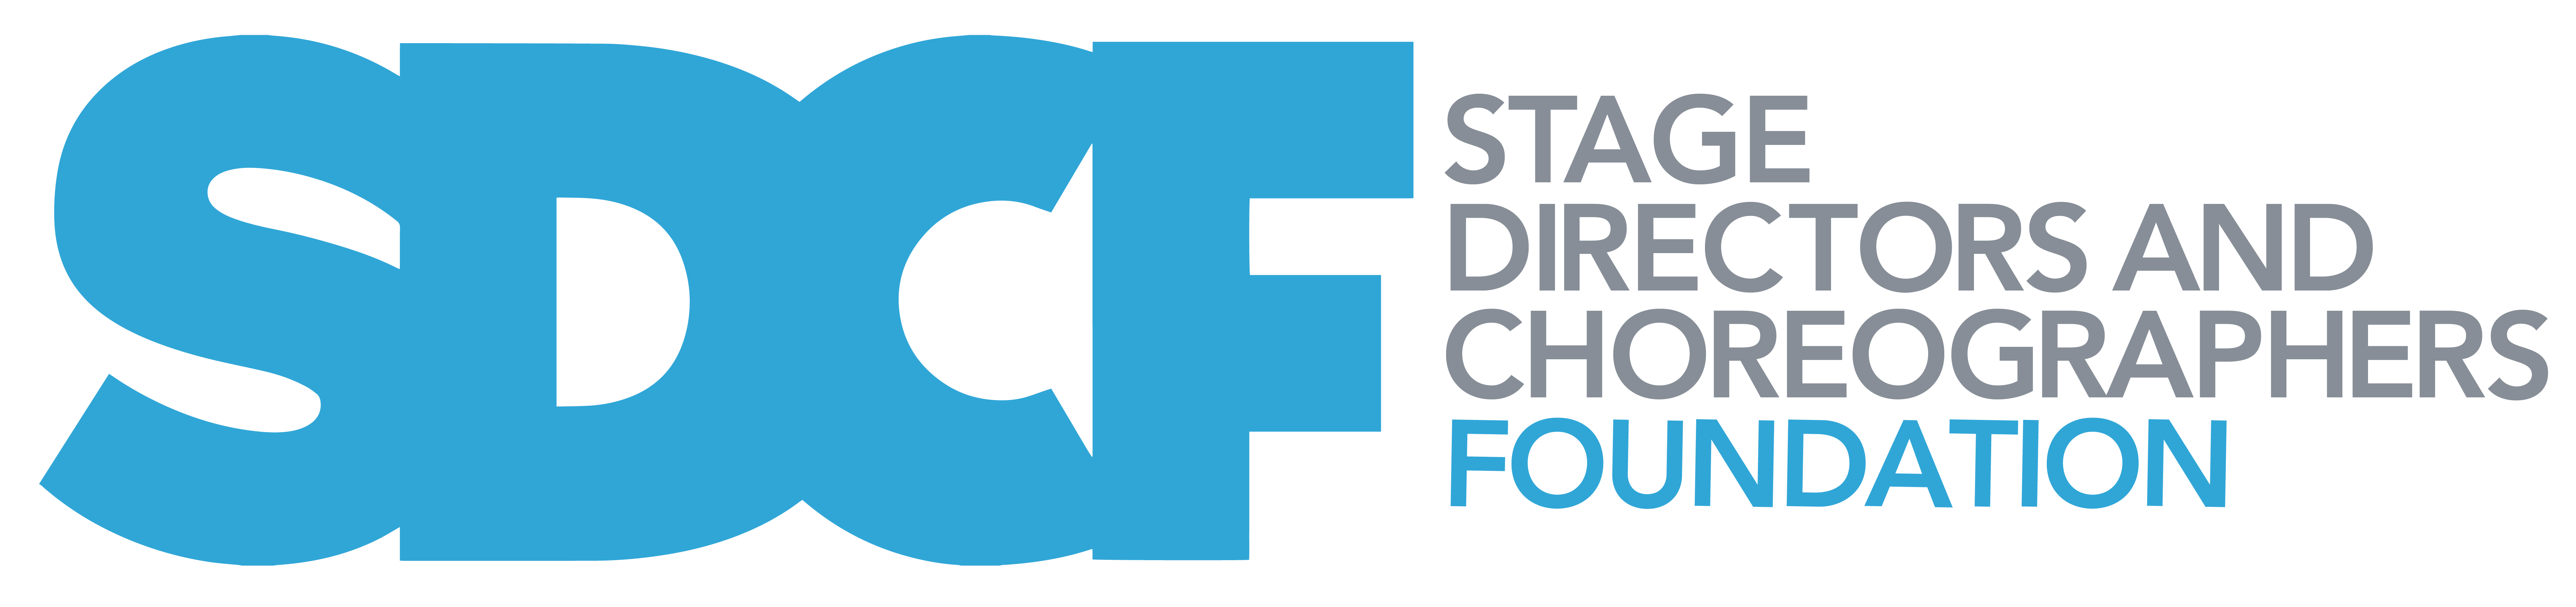 Stage Directors and Choreographers Foundation